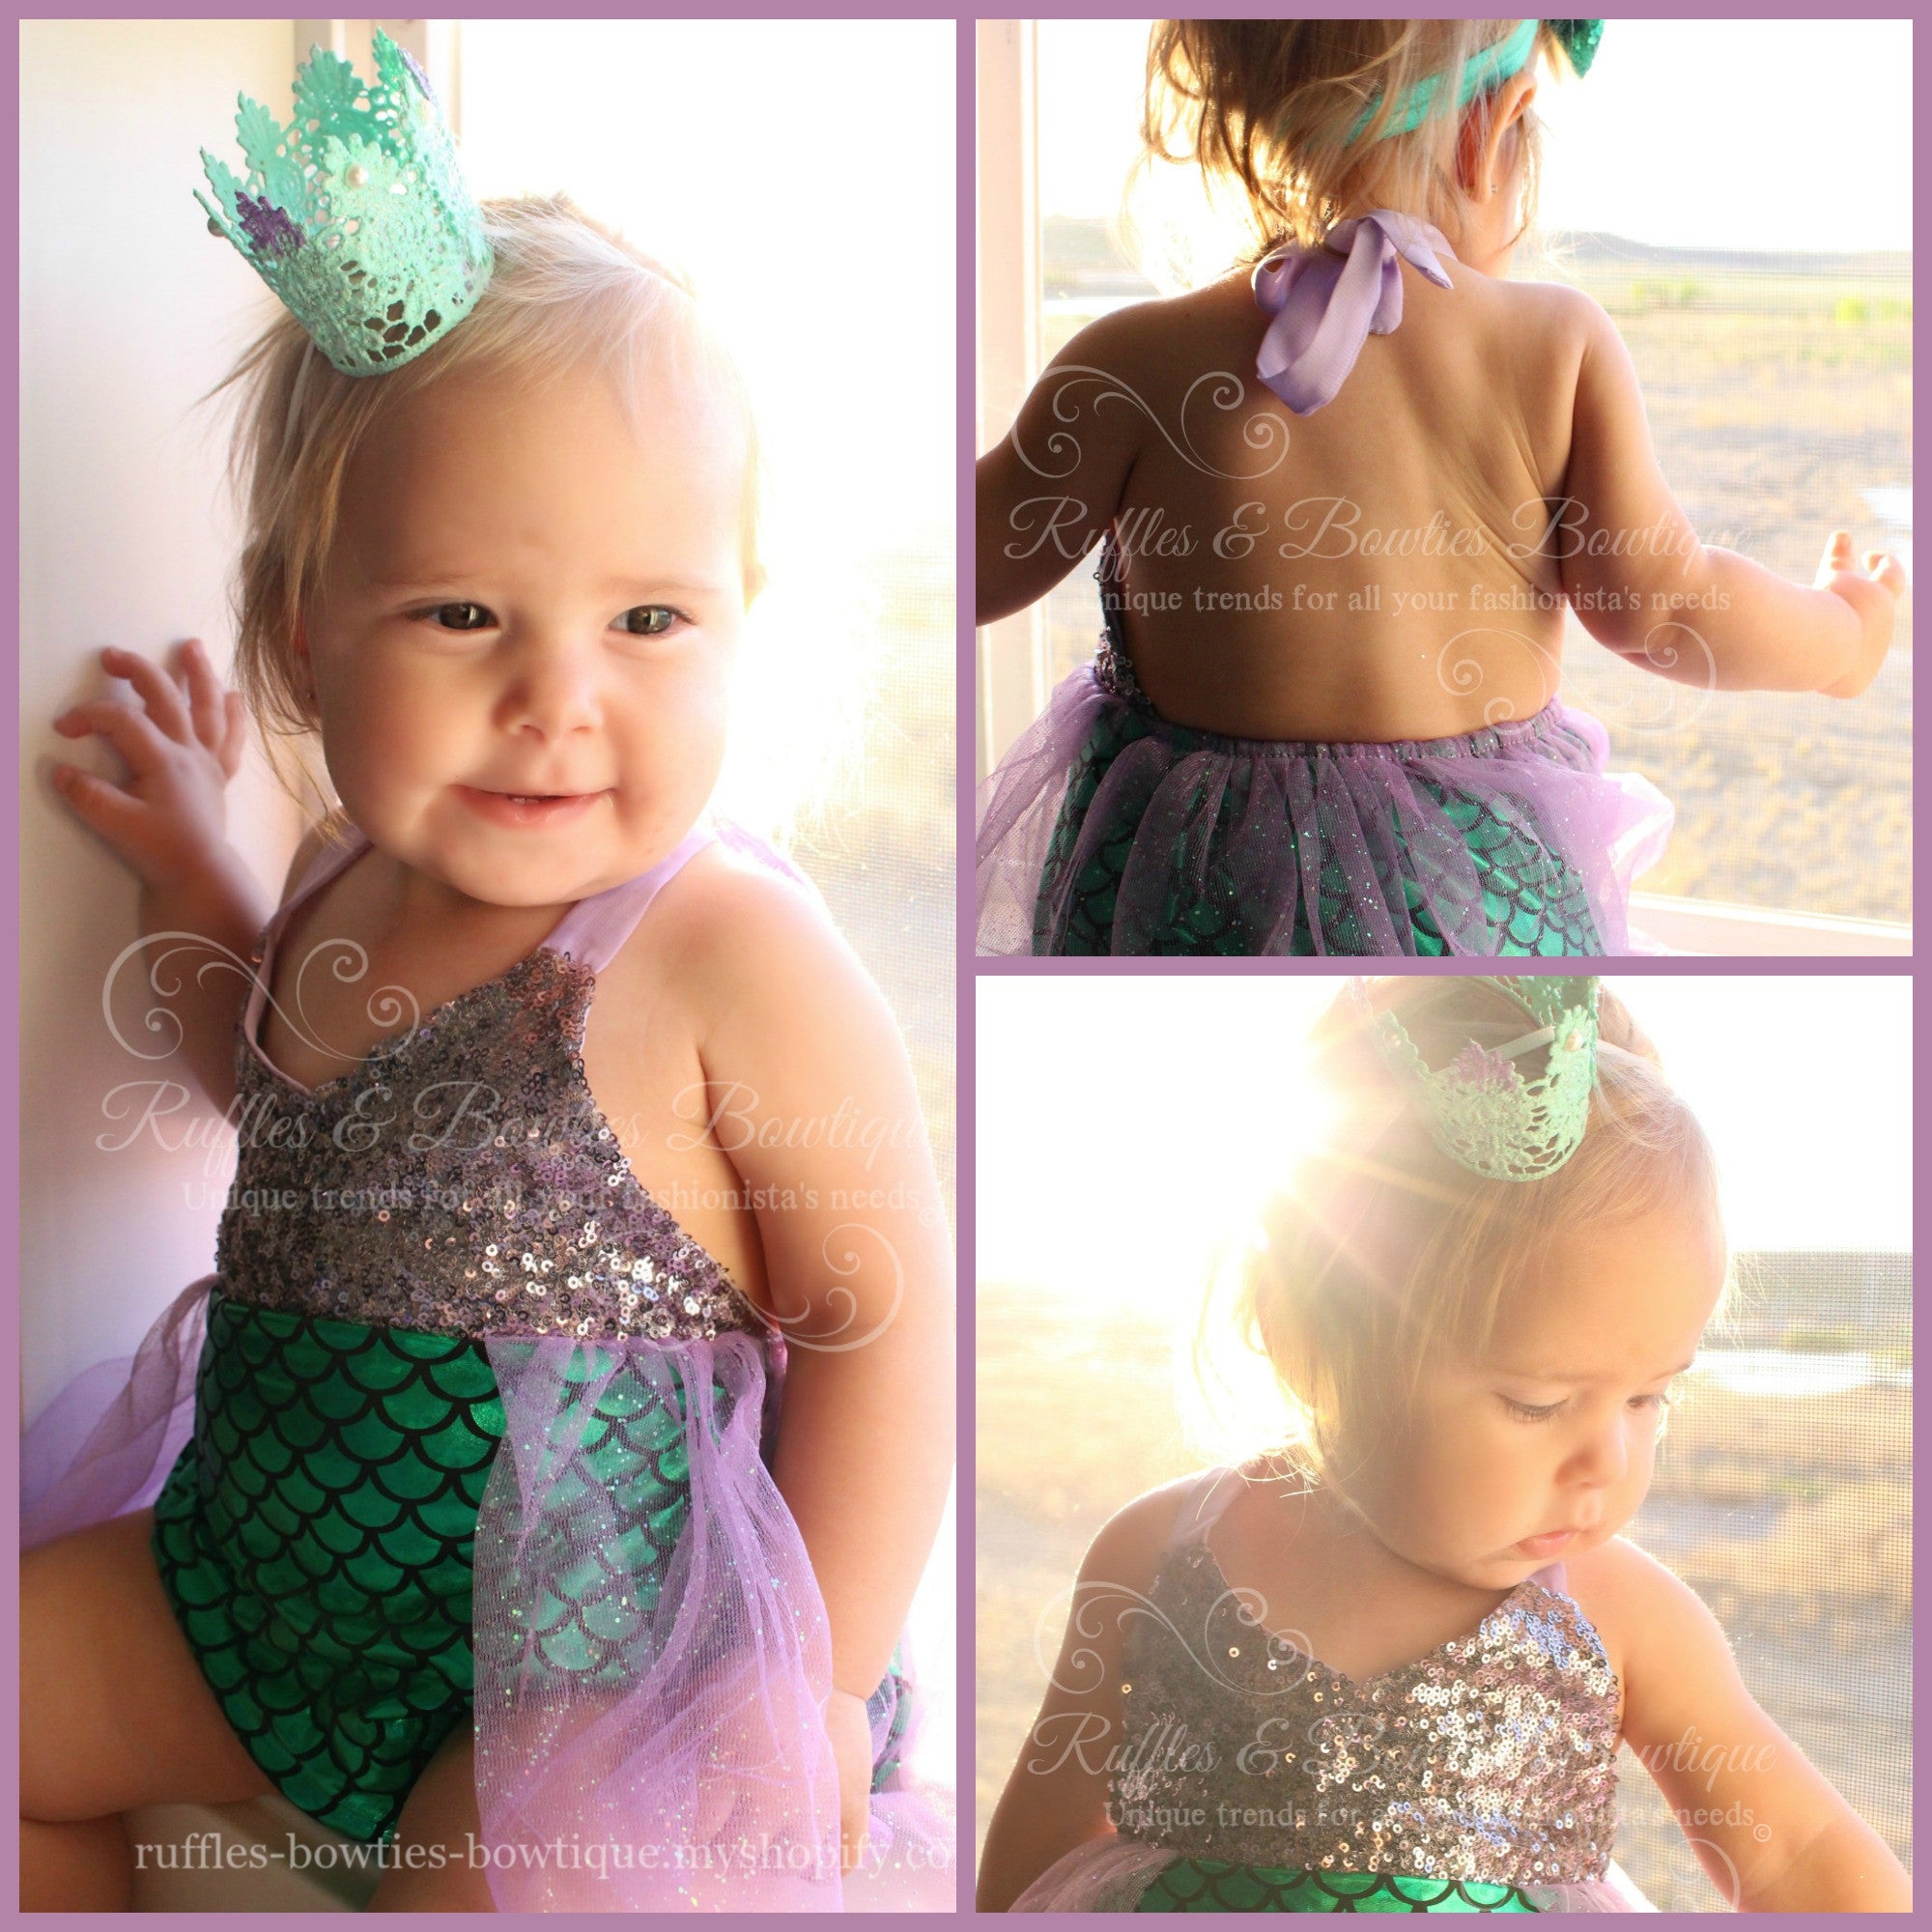 Top Eight Items That Make for a Perfect Mermaid Birthday Party